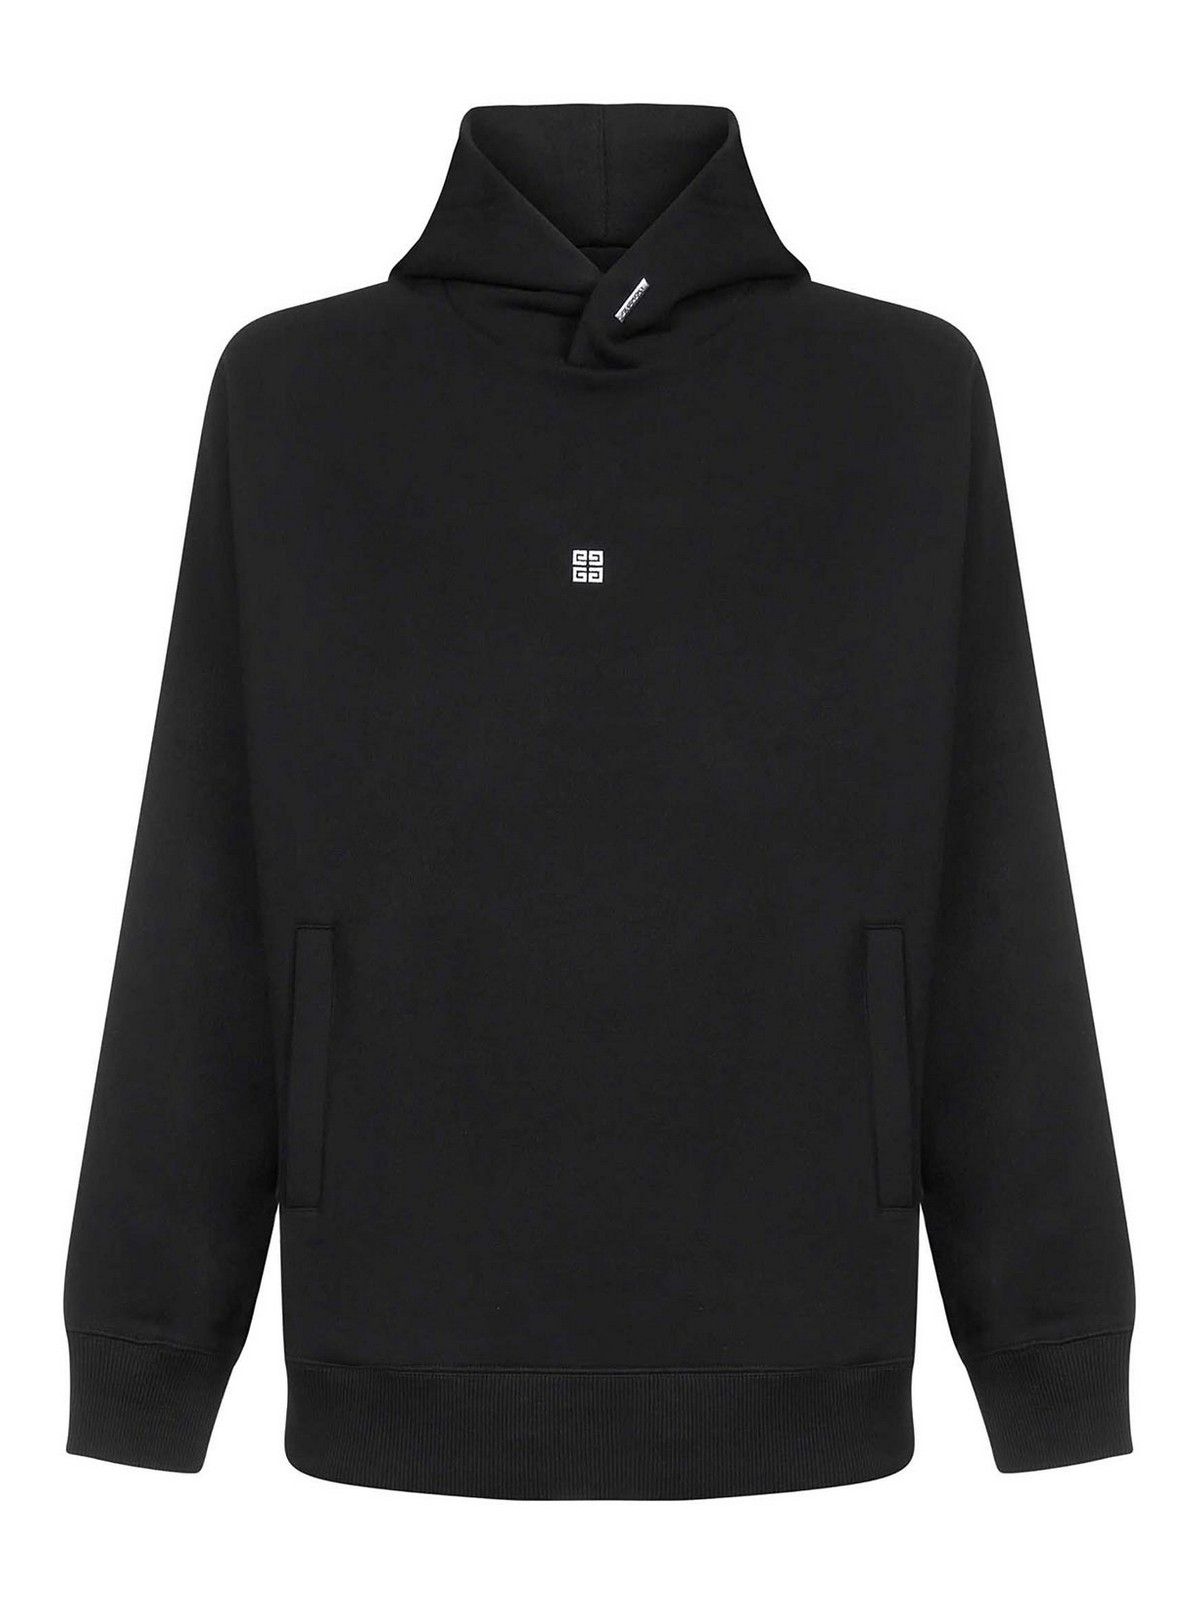 Givenchy Black Hoodie With White 4g Logo